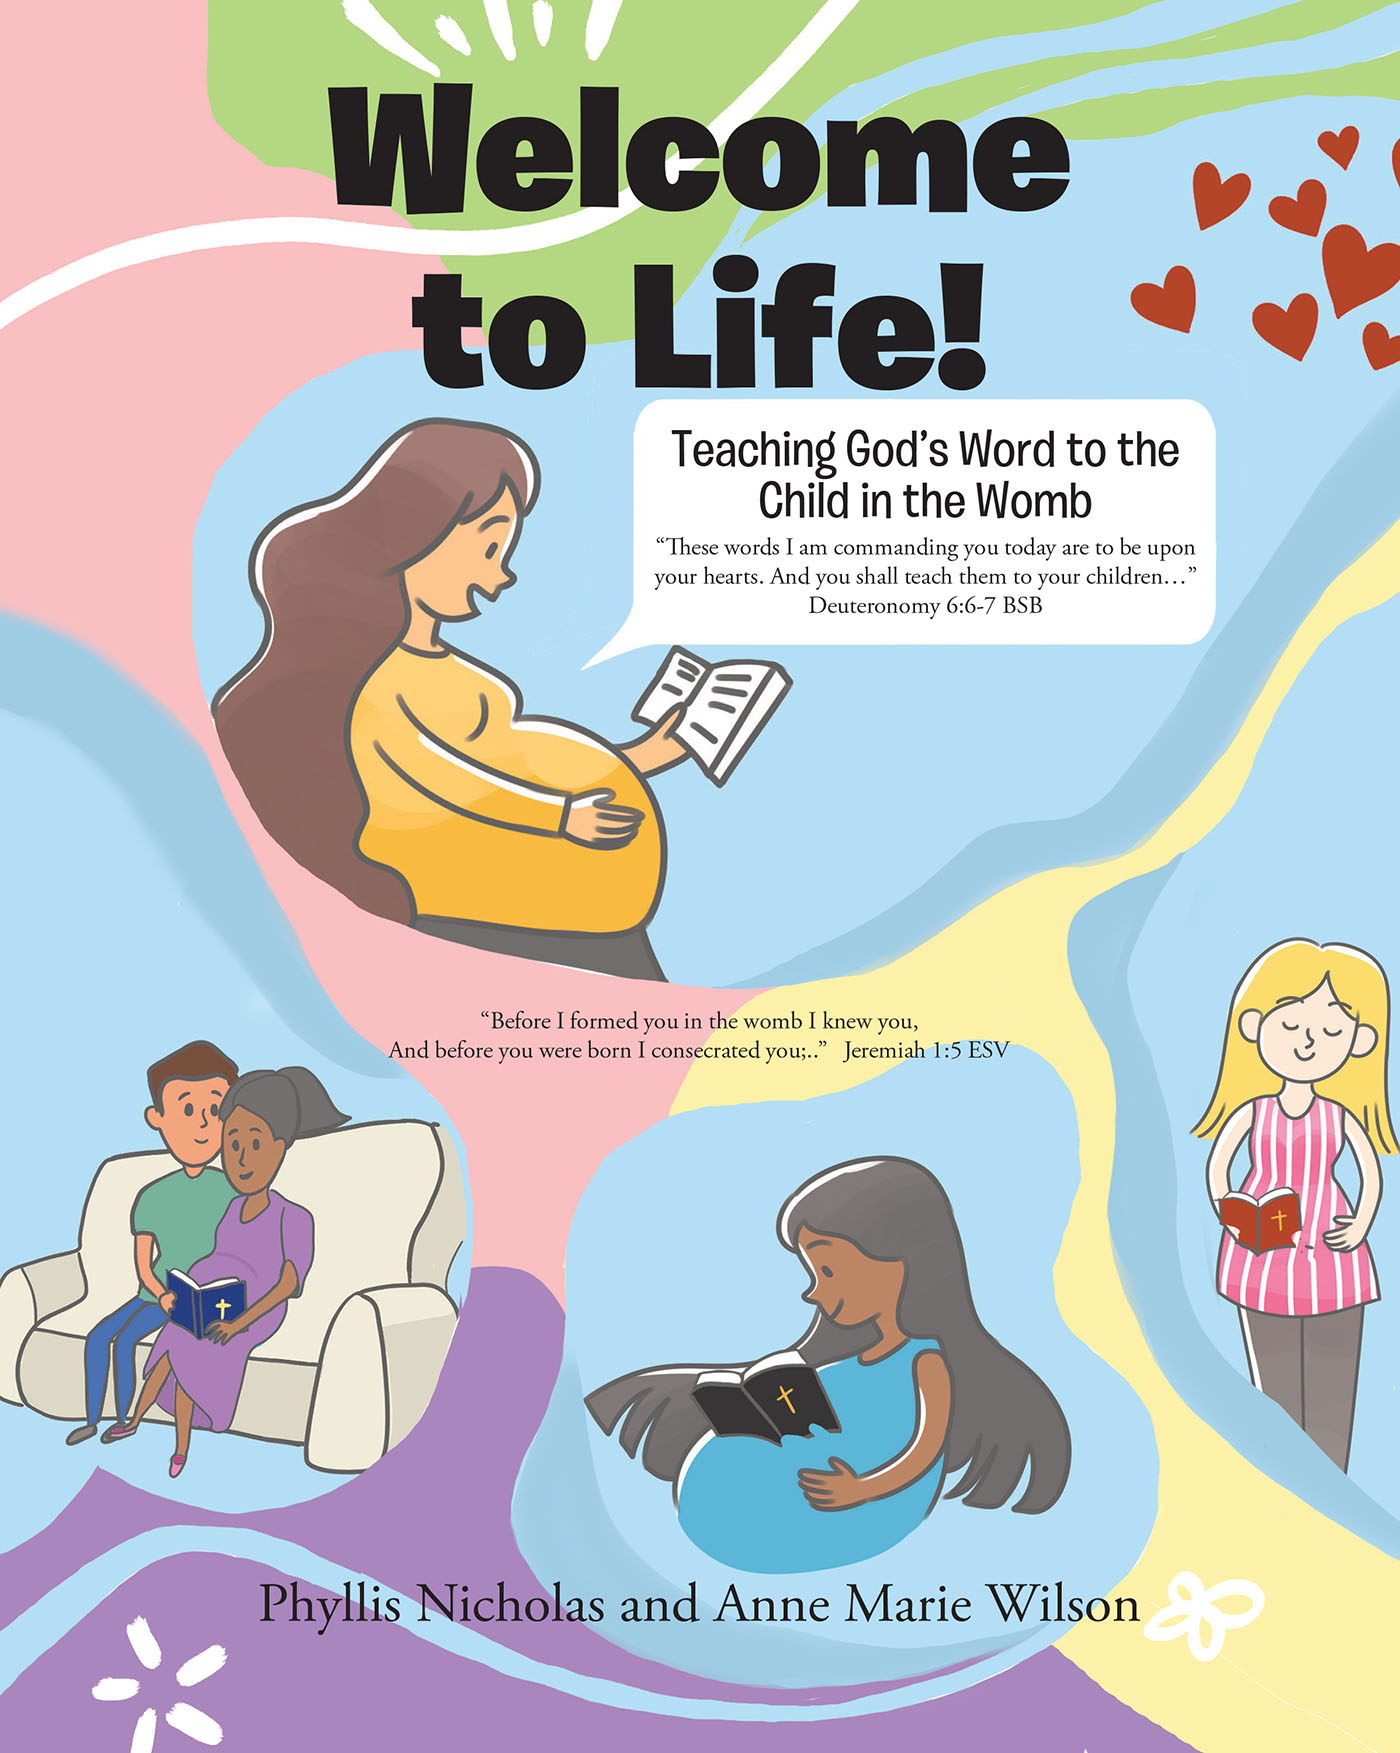 Phyllis Nicholas and Anne Marie Wilson’s Newly Released "Welcome to Life! Teaching God’s Word to the Child in the Womb" is a Sweet Message for Expectant Mothers